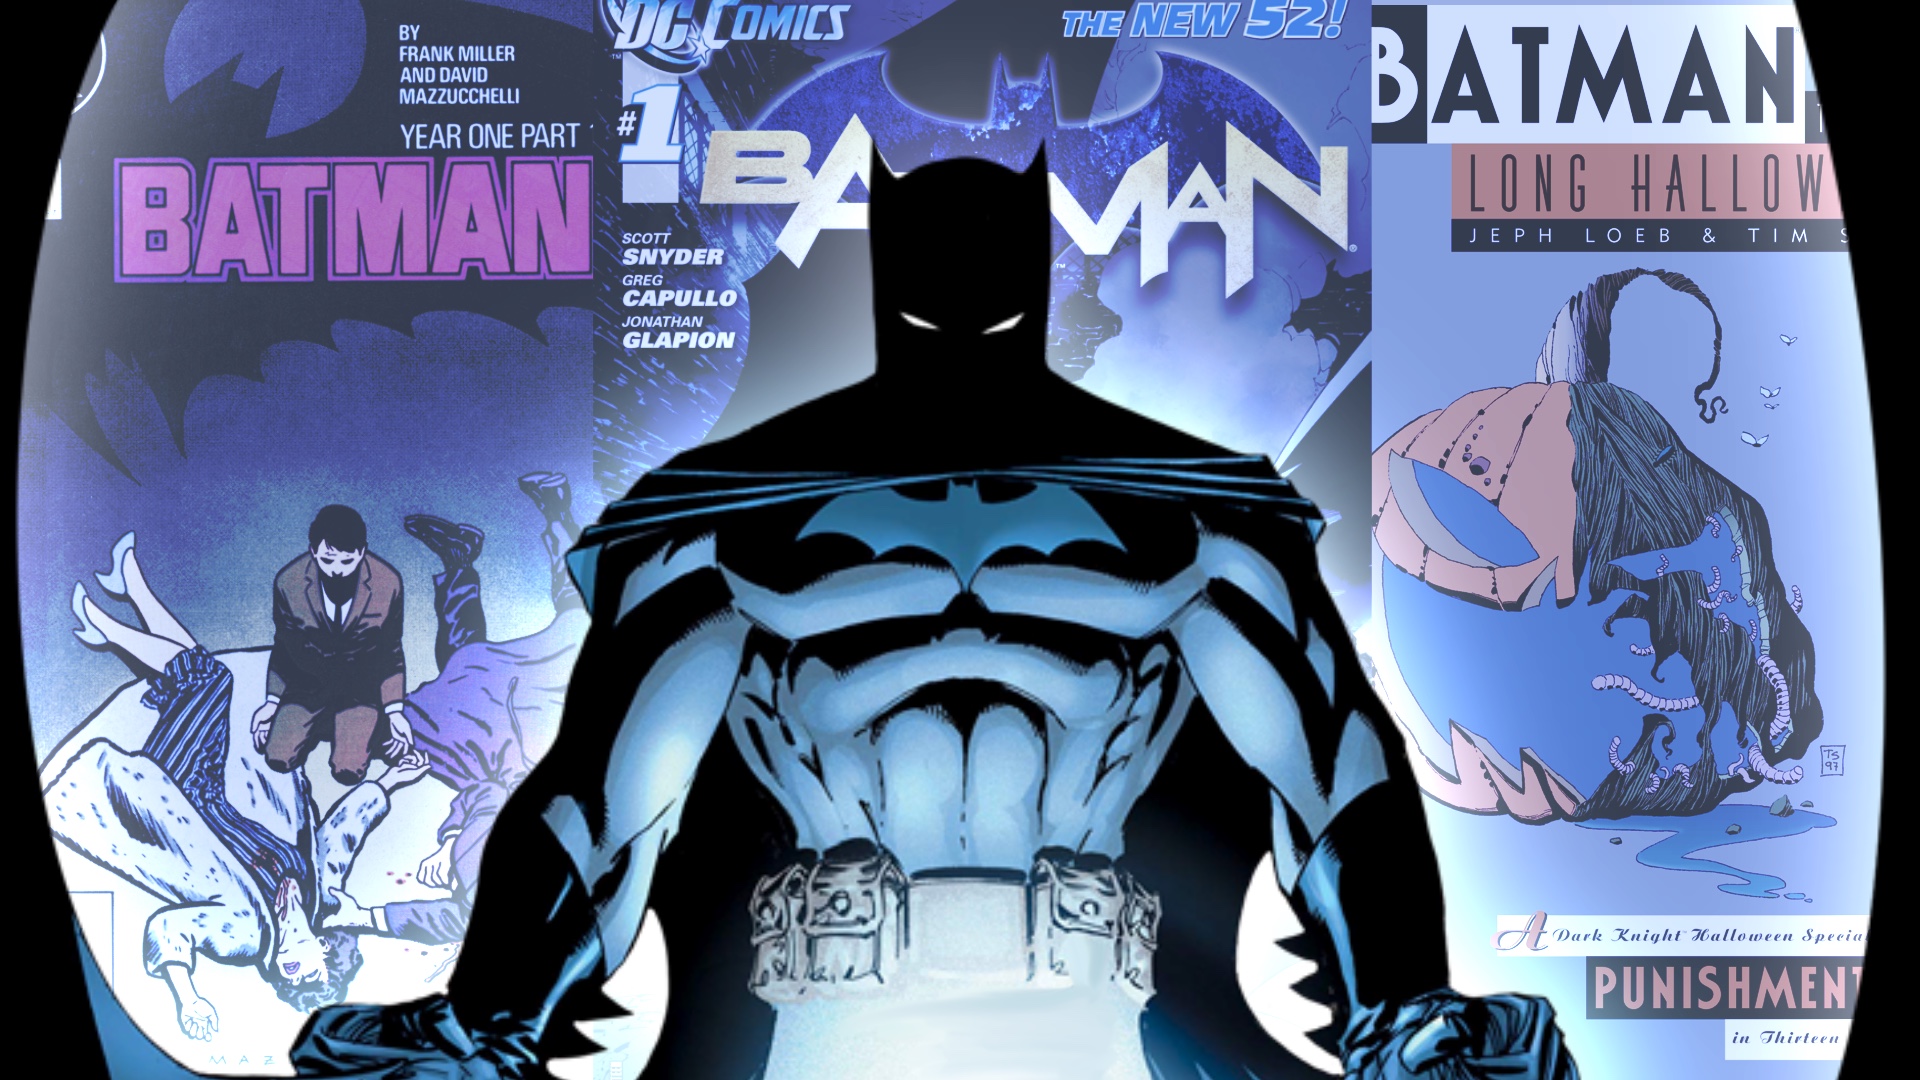 You pick the issue s Batman Comic book issues